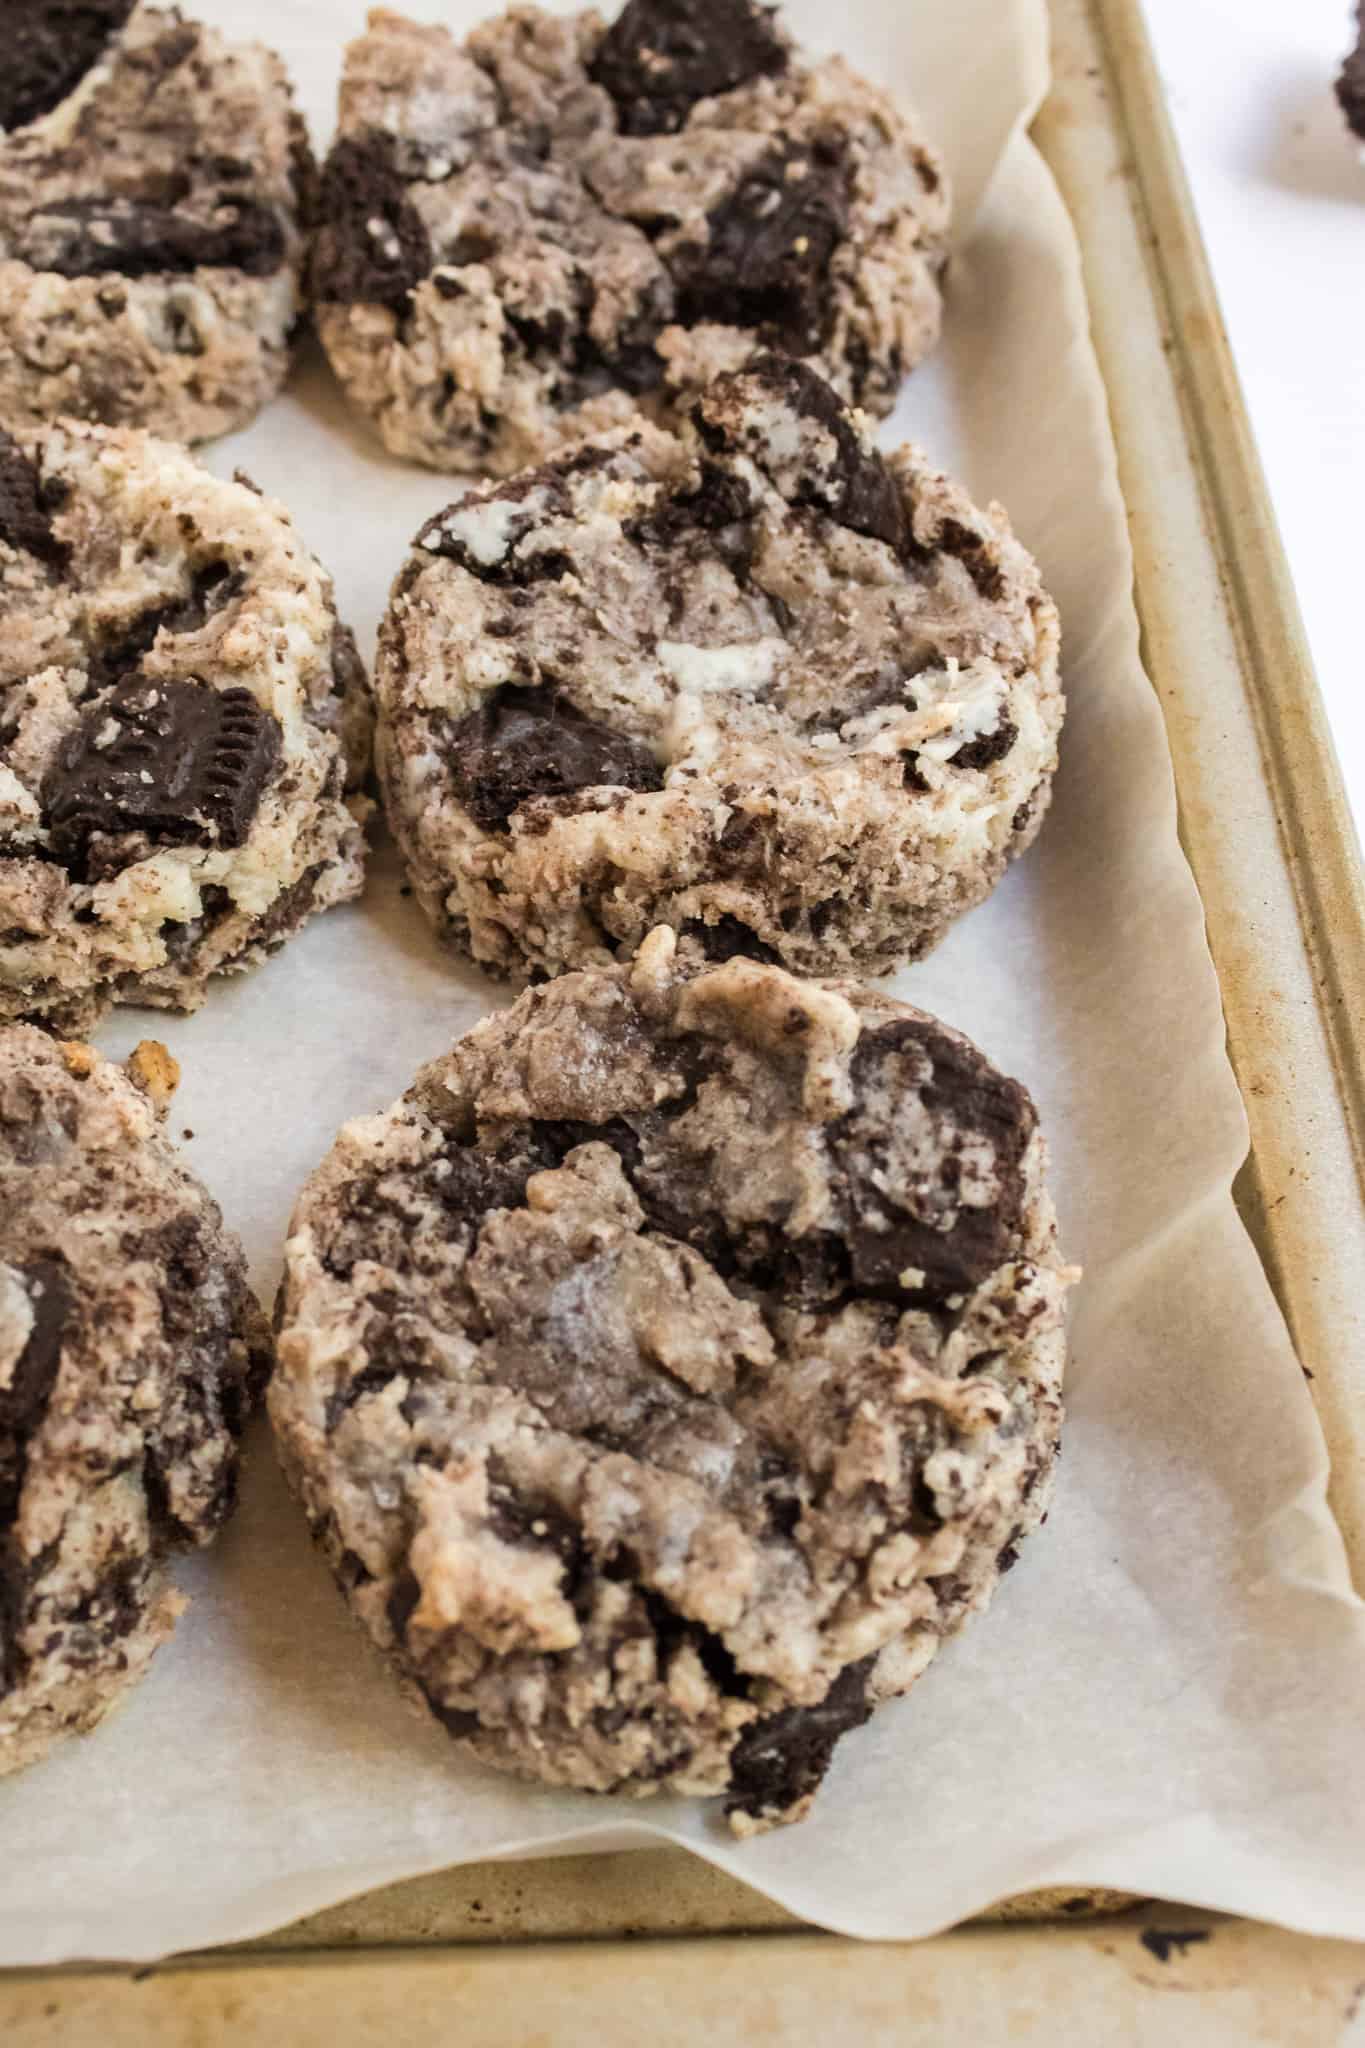 Oreo Cheesecake Cookies are delicious, soft and fluffy cookies loaded with cream cheese and crushed Oreos.